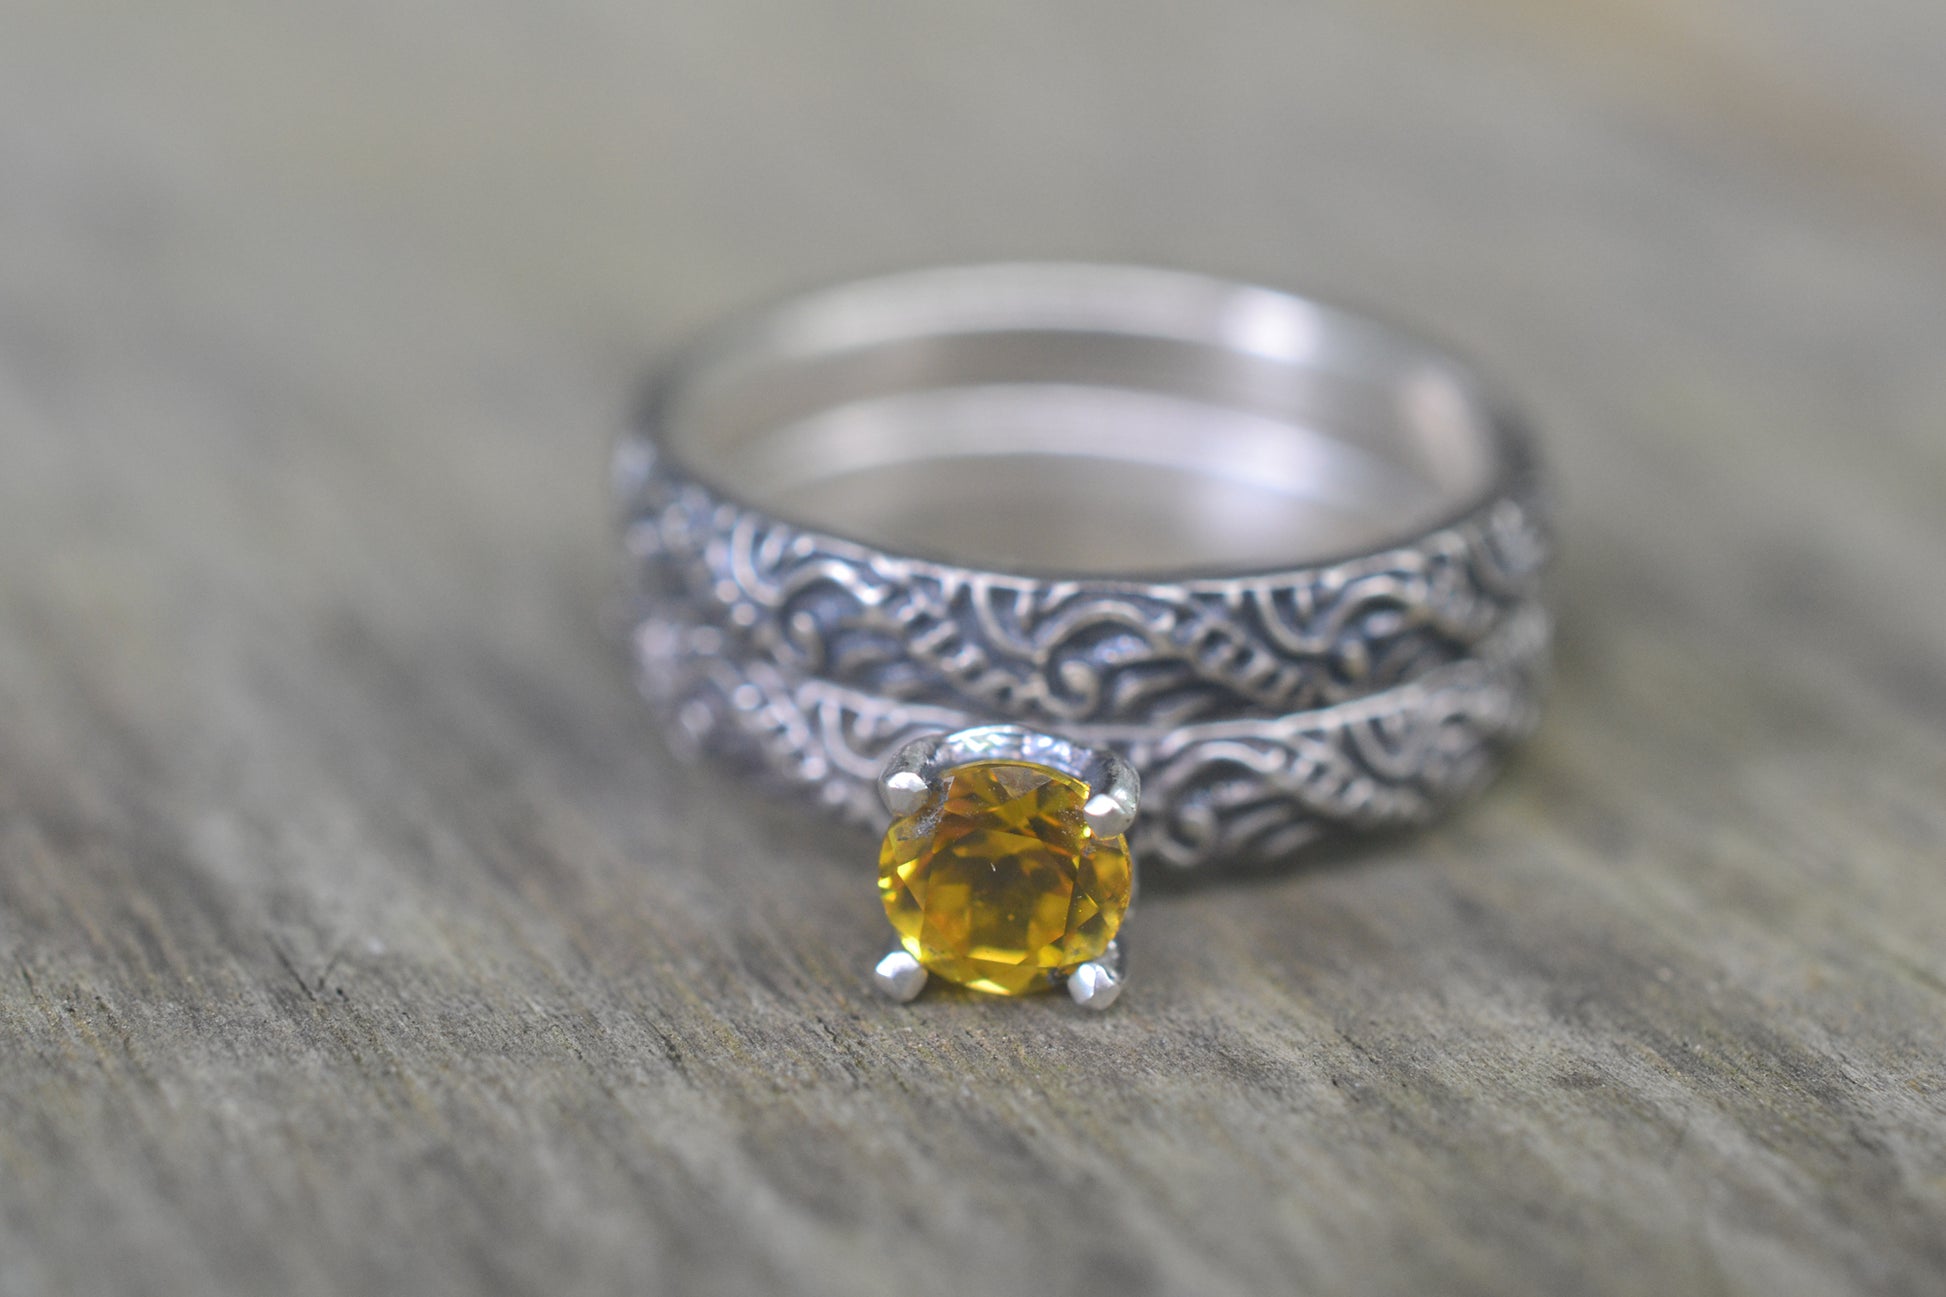 5mm Yellow Sapphire Bridal Set in Sterling